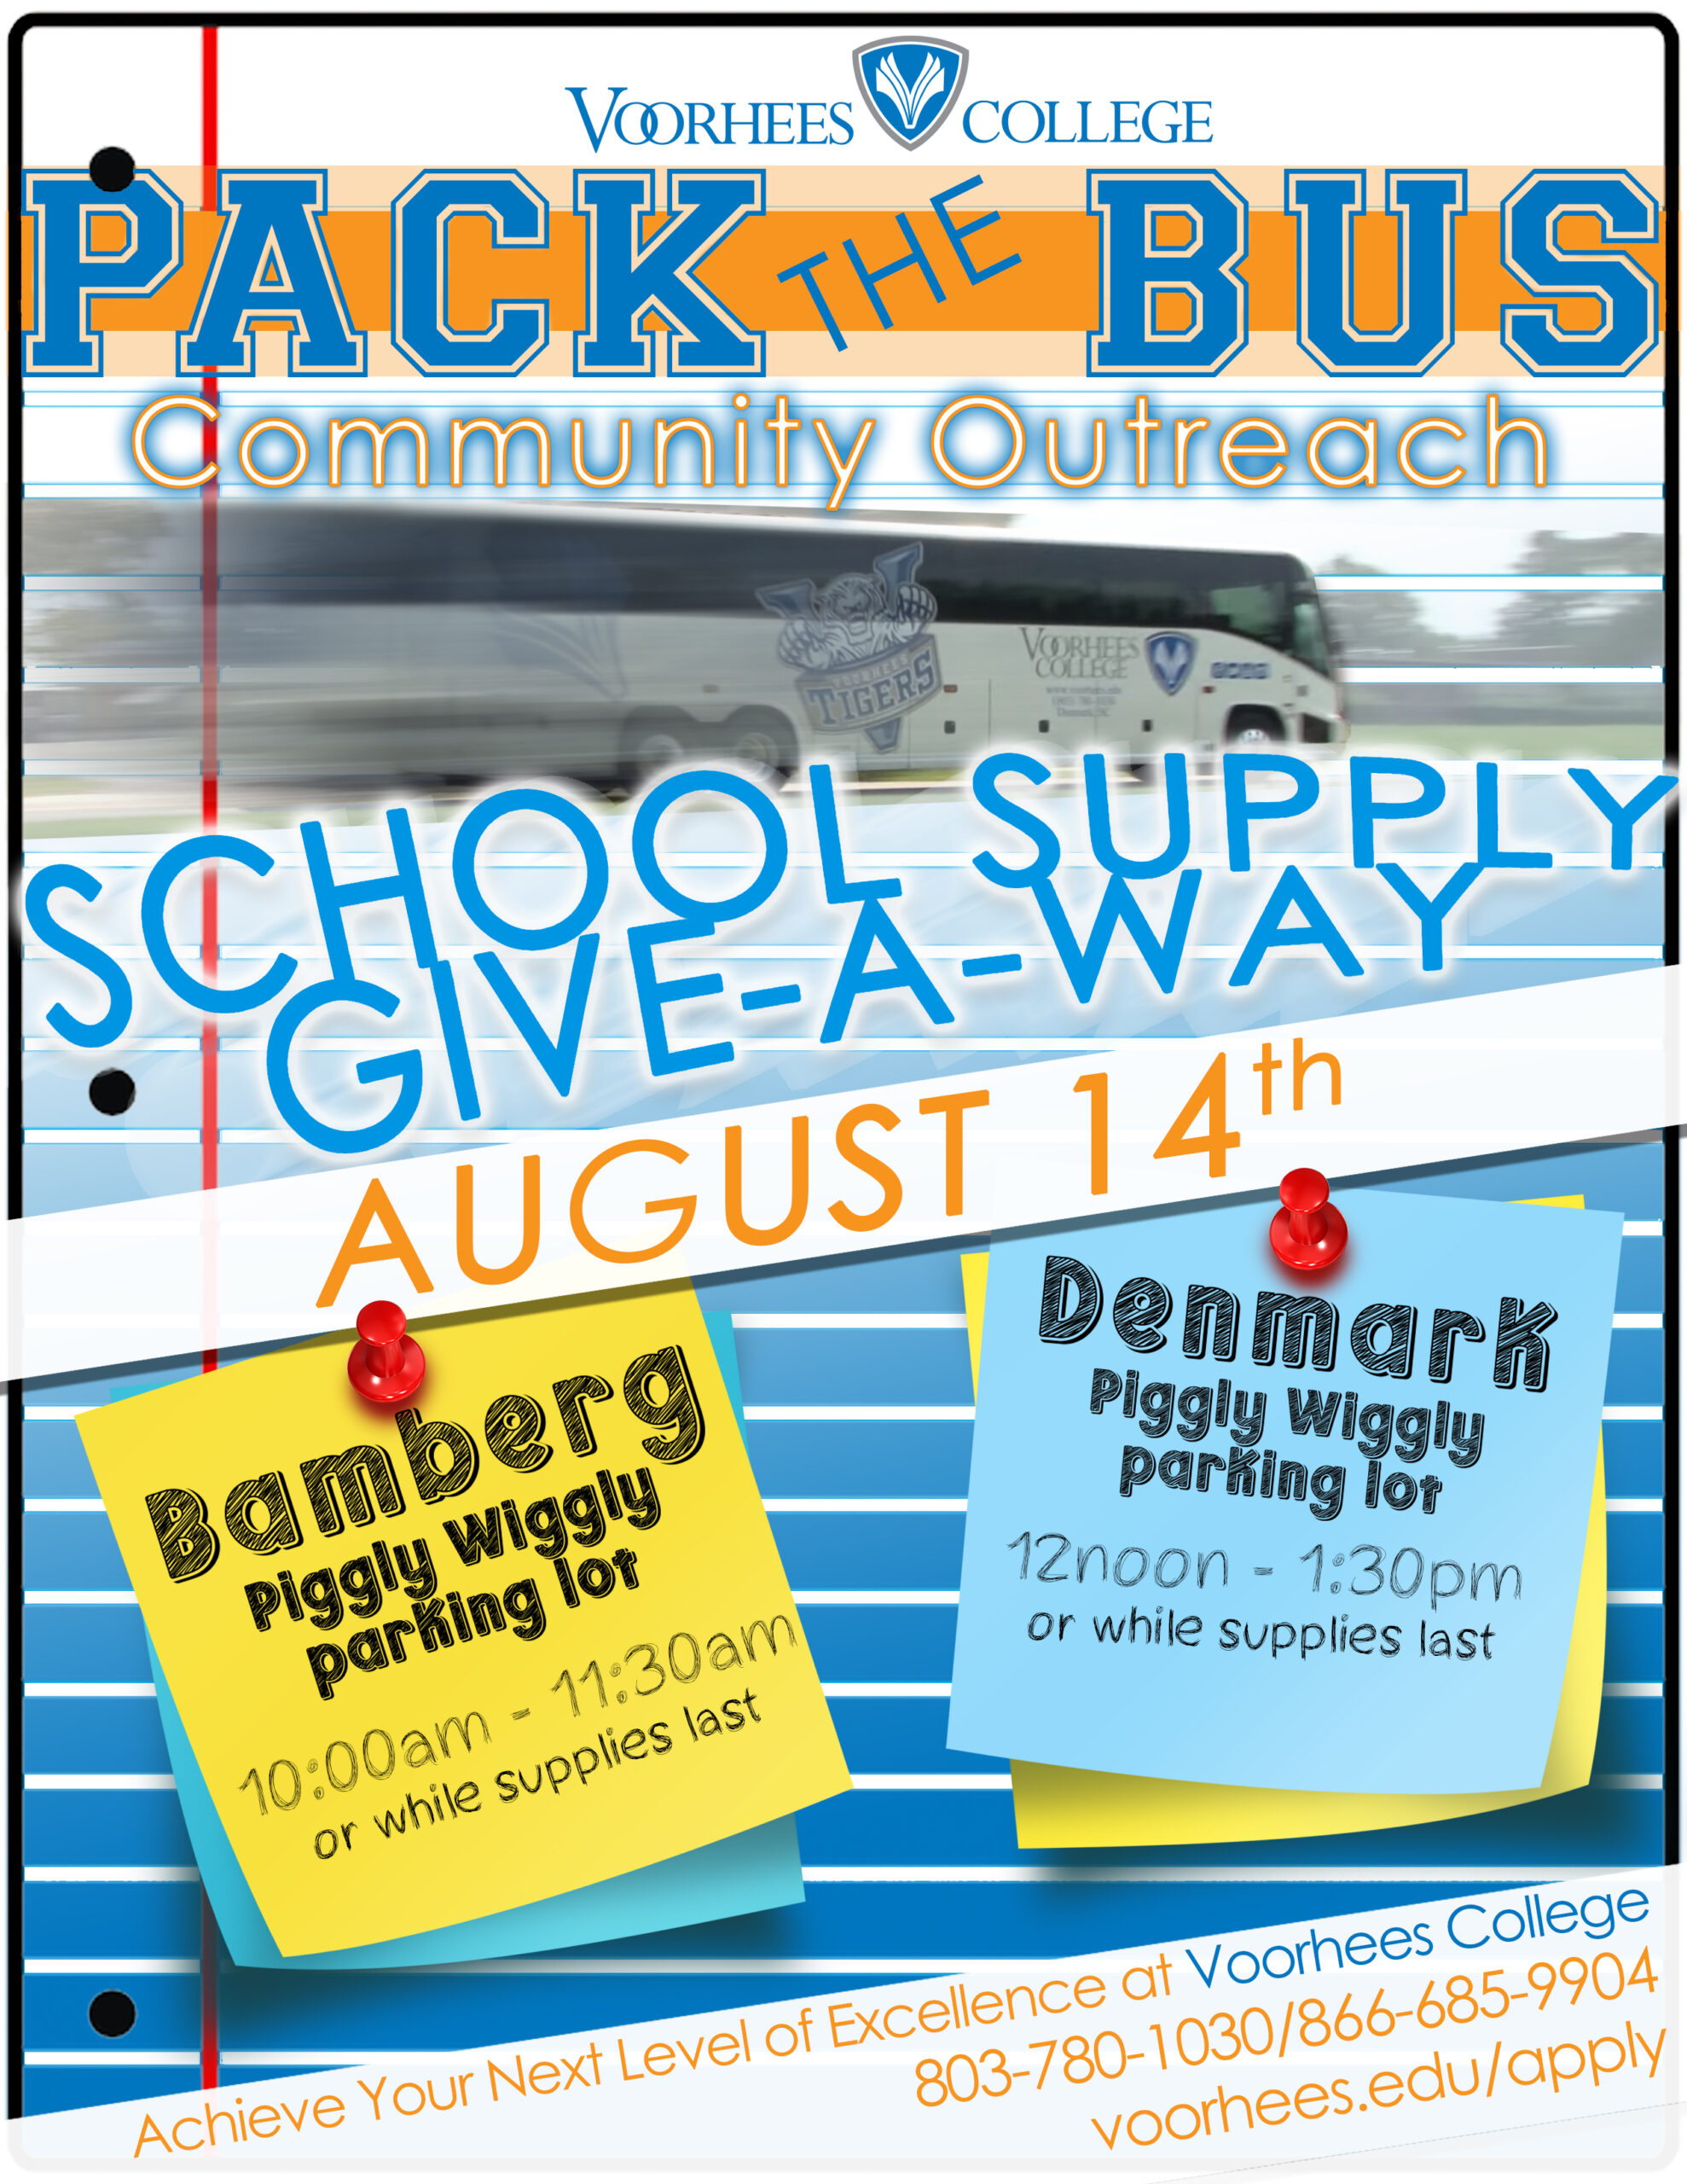 School supply giveaway flyer design scaled